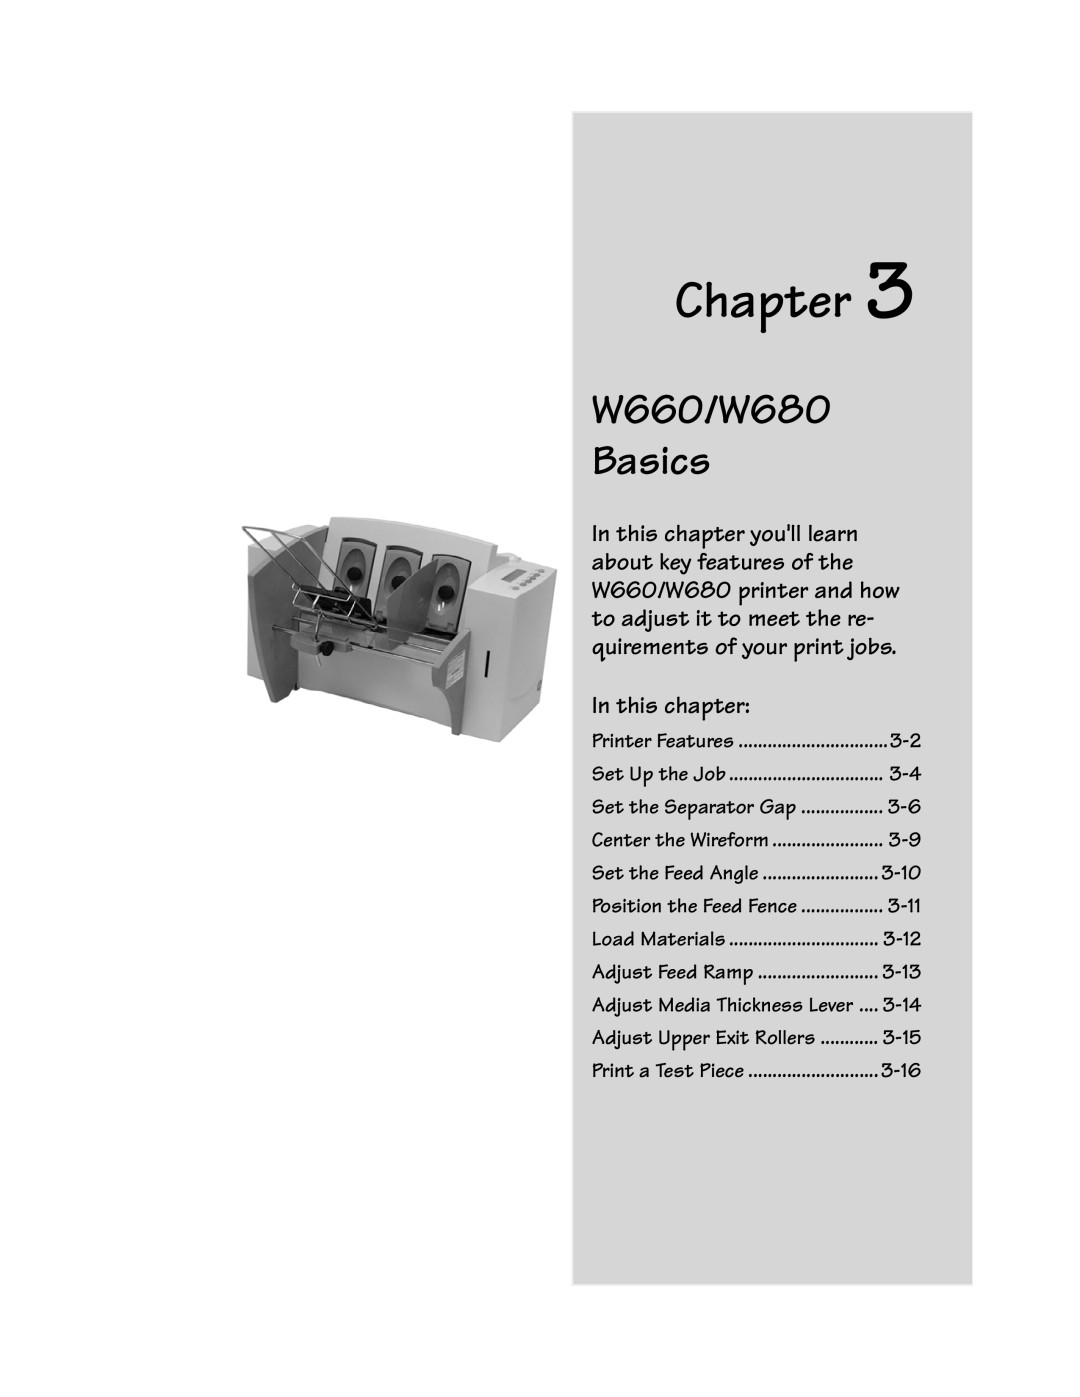 Pitney Bowes W660/W680 Basics, 3-10, 3-11, 3-12, 3-13, 3-14, 3-15, 3-16, Chapter, In this chapter, Printer Features 